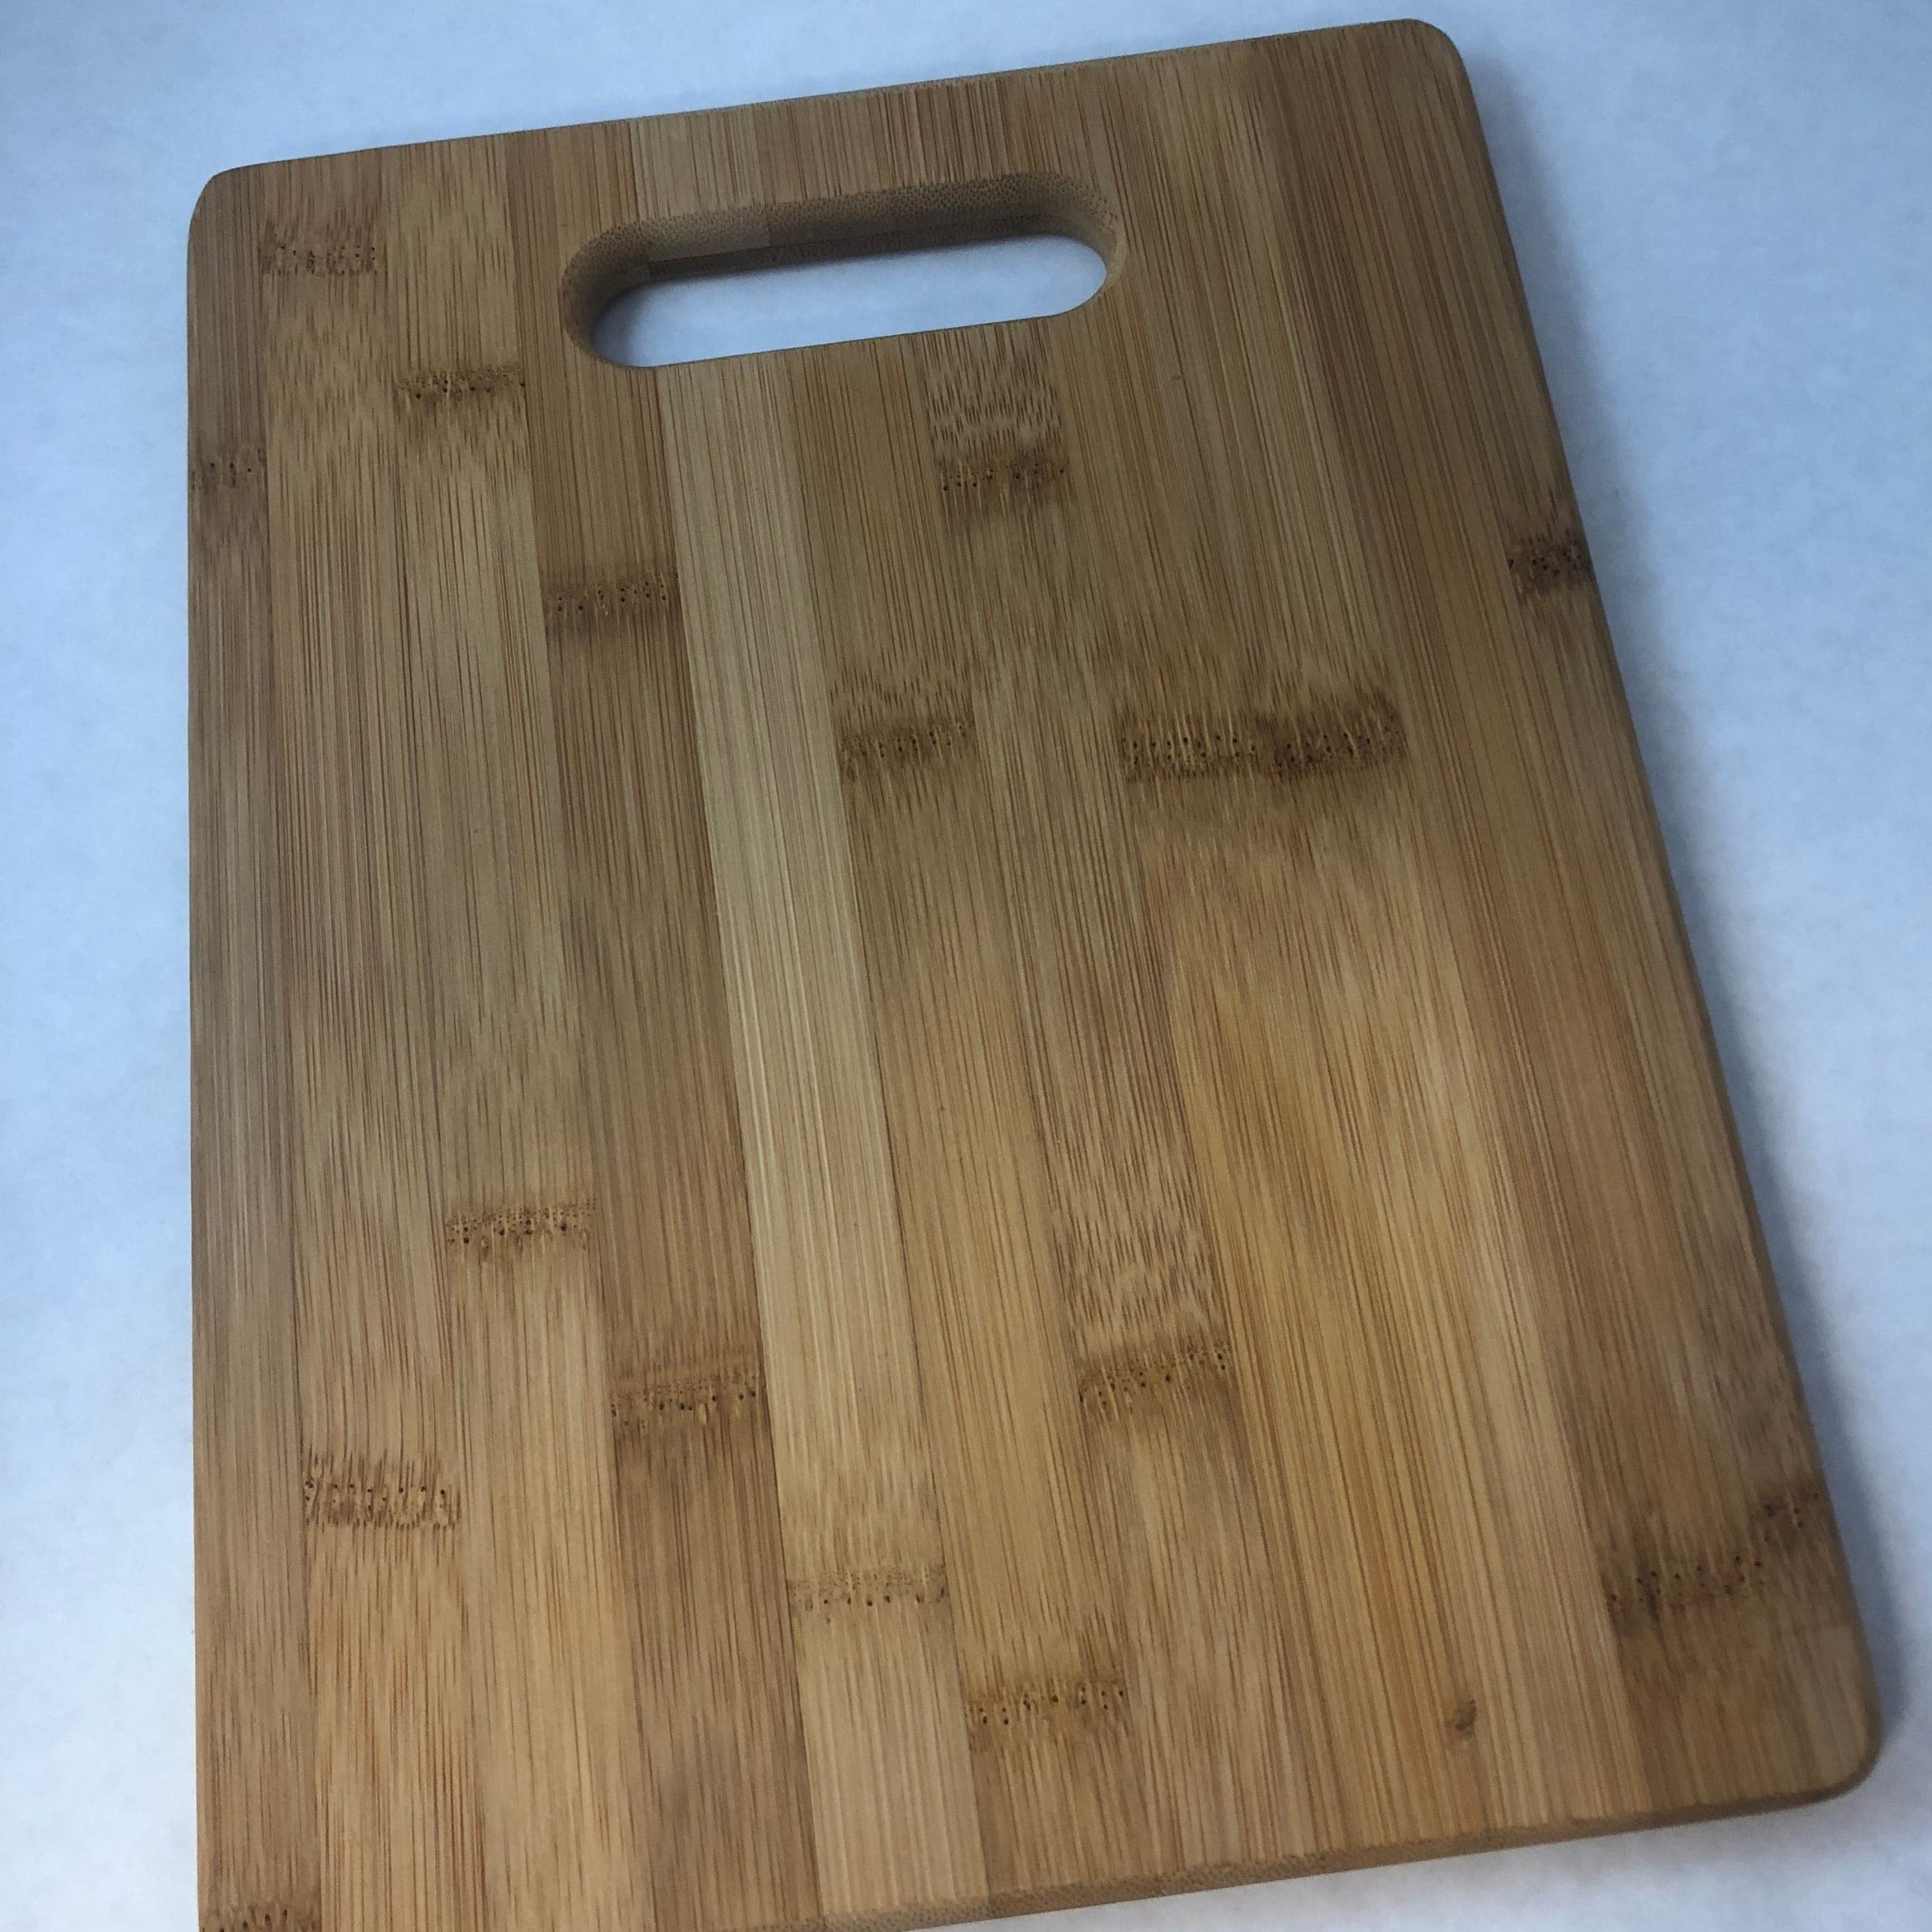 HetayC Wooden Cutting Board, Laser Engraved Board, Chopping board-Best Gift  for Mom, Cutting board for Mom, Mothers day Gift 